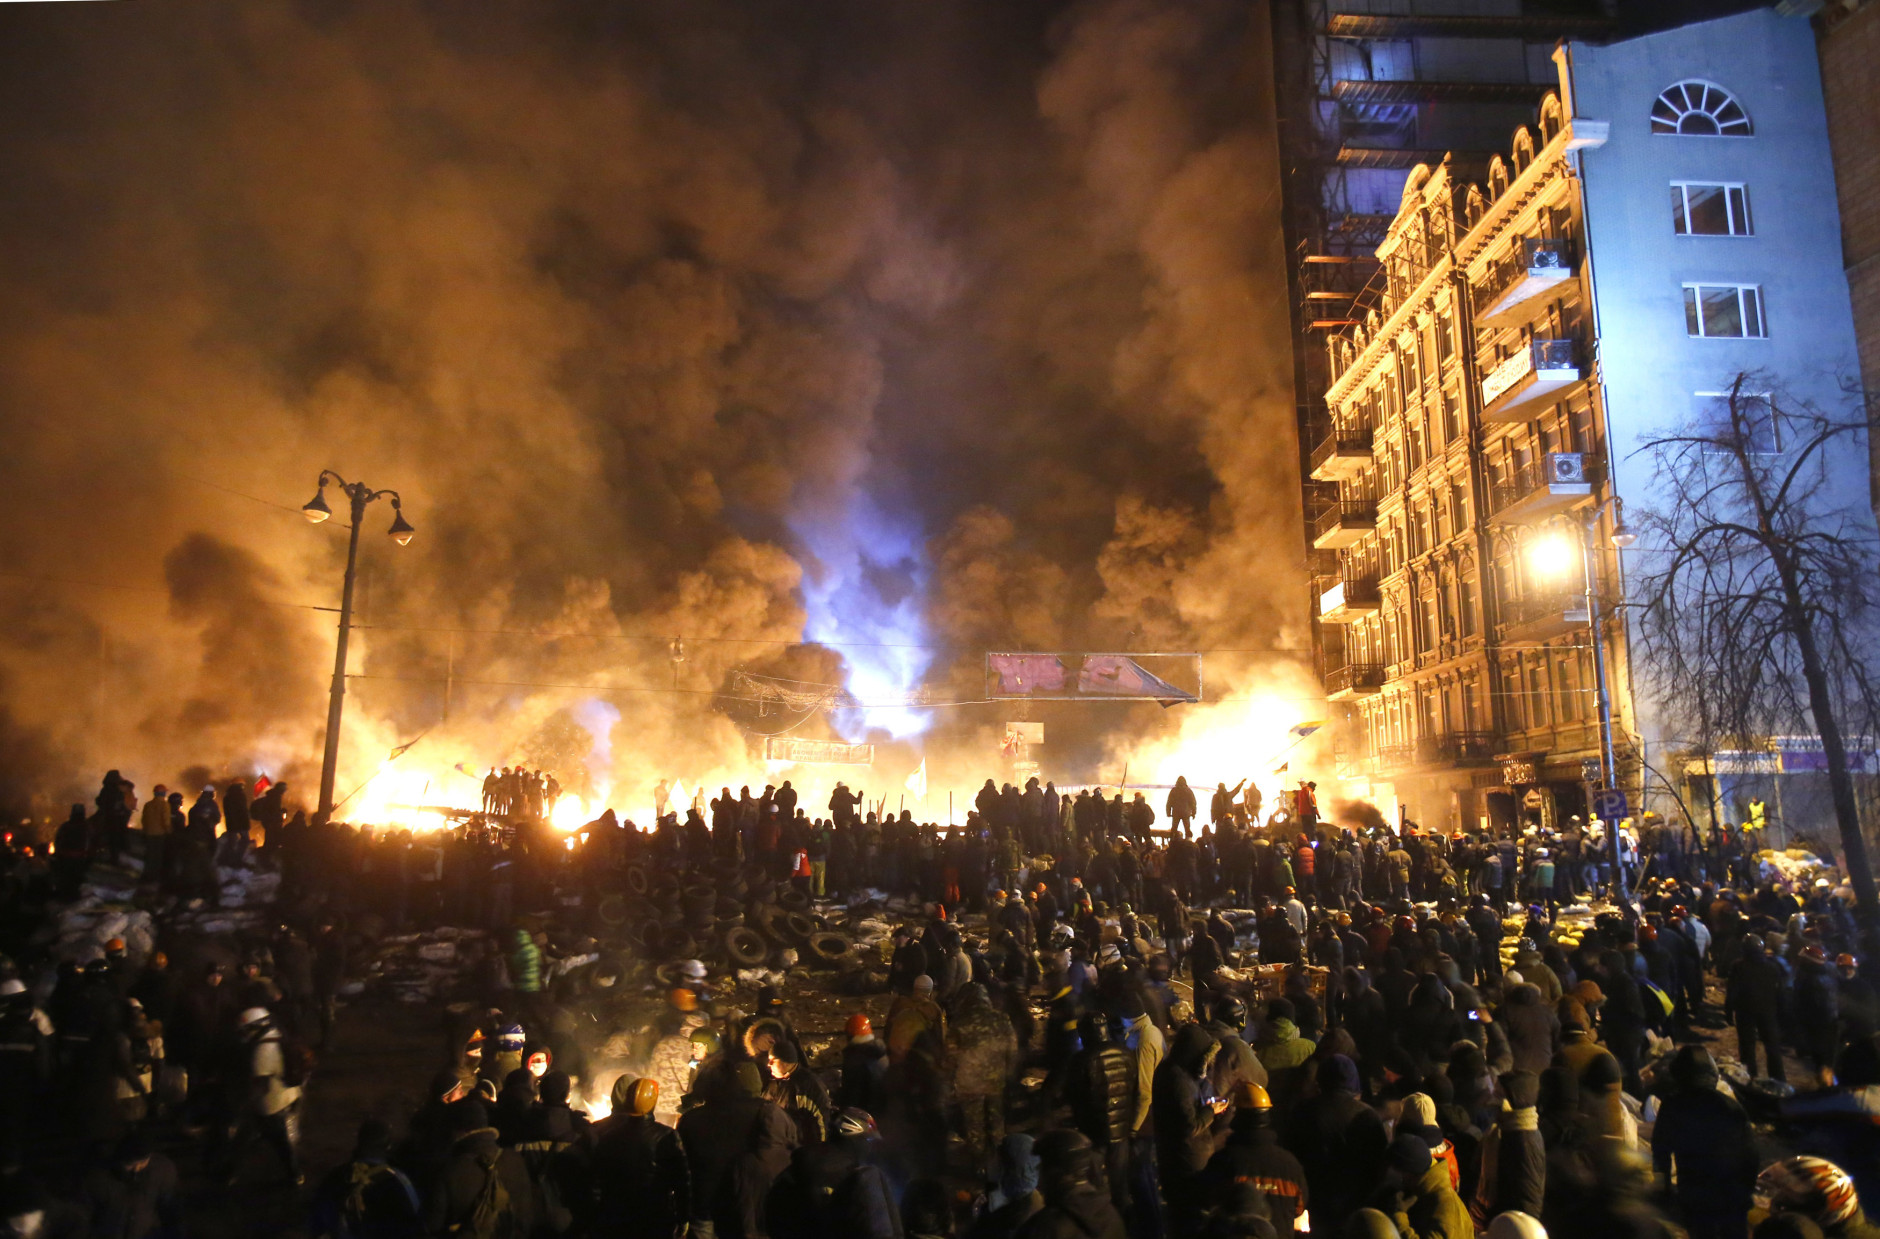 FOR USE AS DESIRED, YEAR END PHOTOS - FILE - Black smoke and fireballs rise during clashes between protesters and police in central Kiev, Ukraine, early Saturday, Jan. 25, 2014. (AP Photo/Sergei Grits, File)